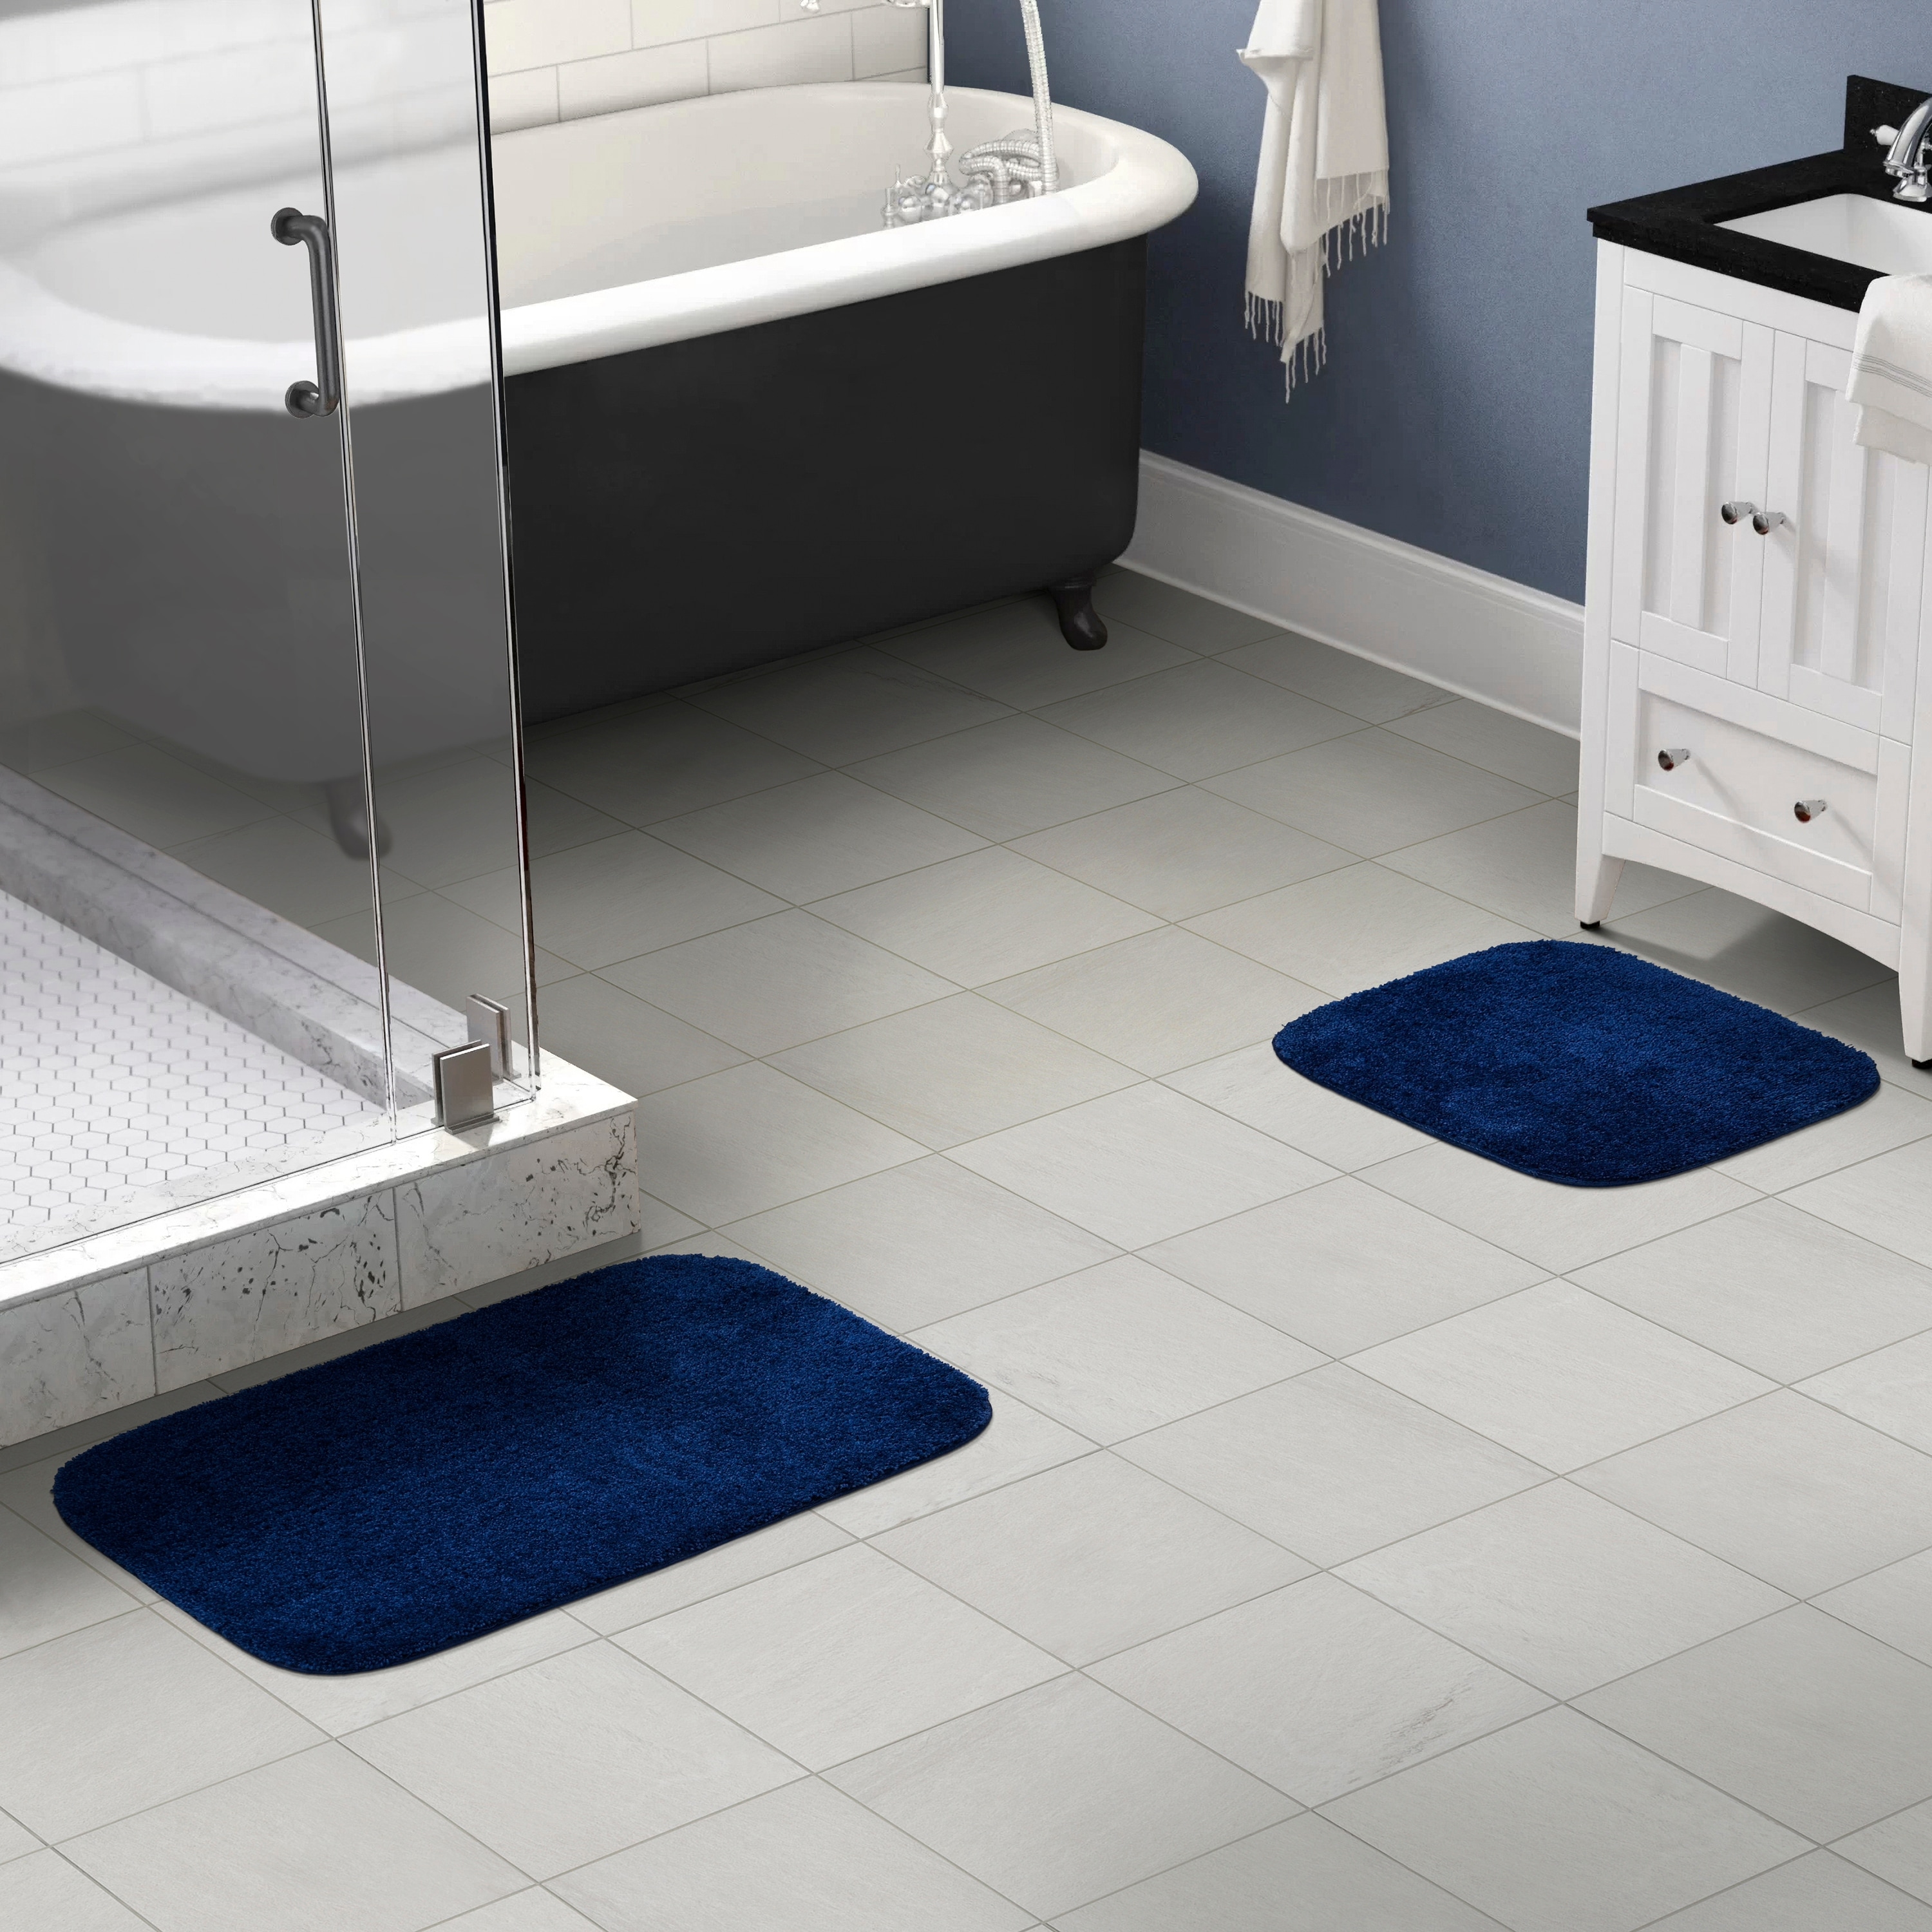 https://ak1.ostkcdn.com/images/products/is/images/direct/c3183121628a1e26aad27674090d7b2ca2ffb71d/Traditional-Plush-Washable-Nylon-Bathroom-Rug.jpg